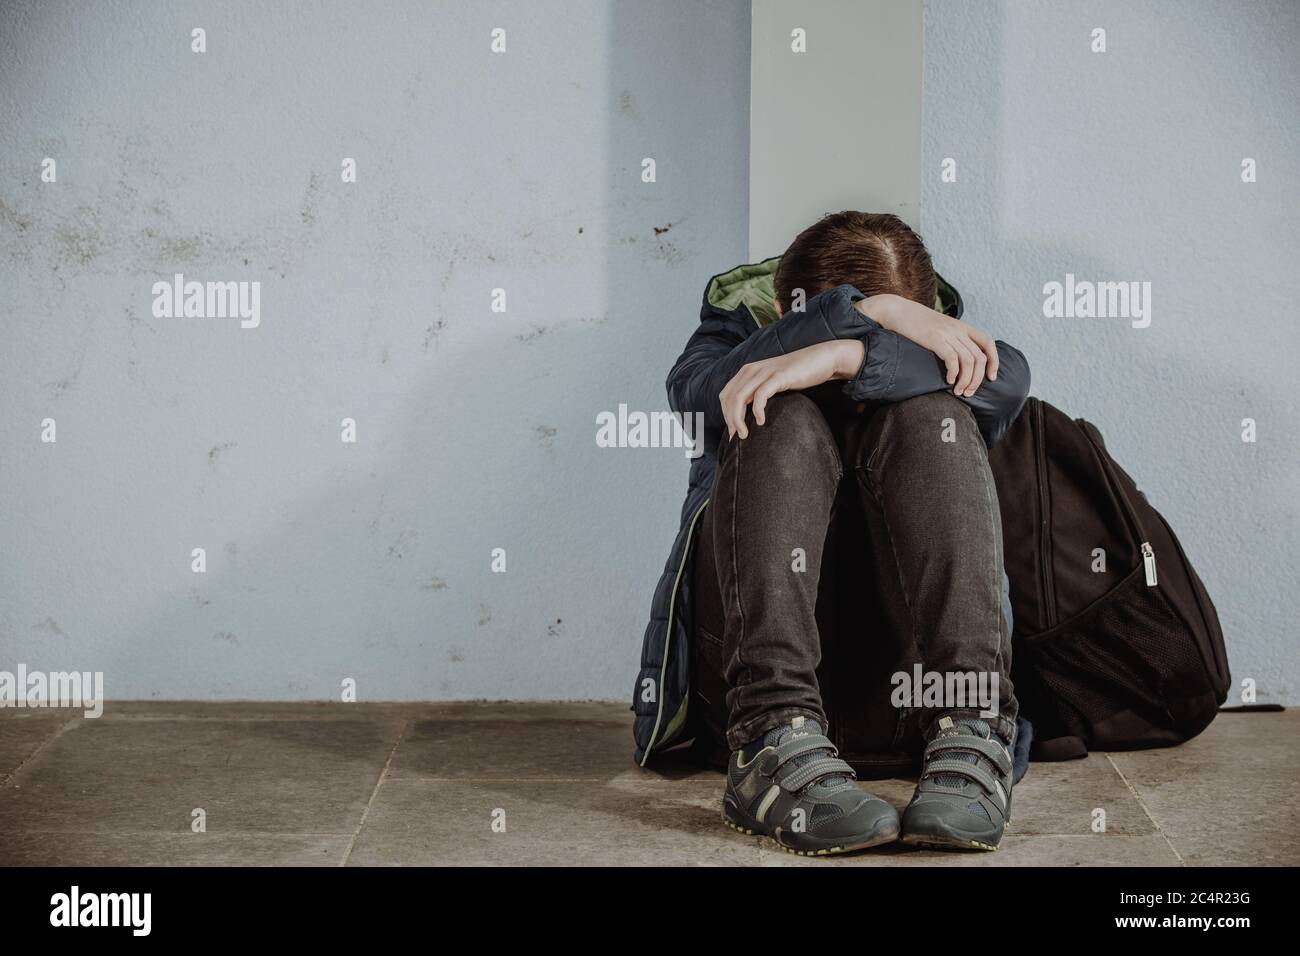 Little boy or school child sitting alone on floor in front of the school after suffering an act of bullying Stock Photo